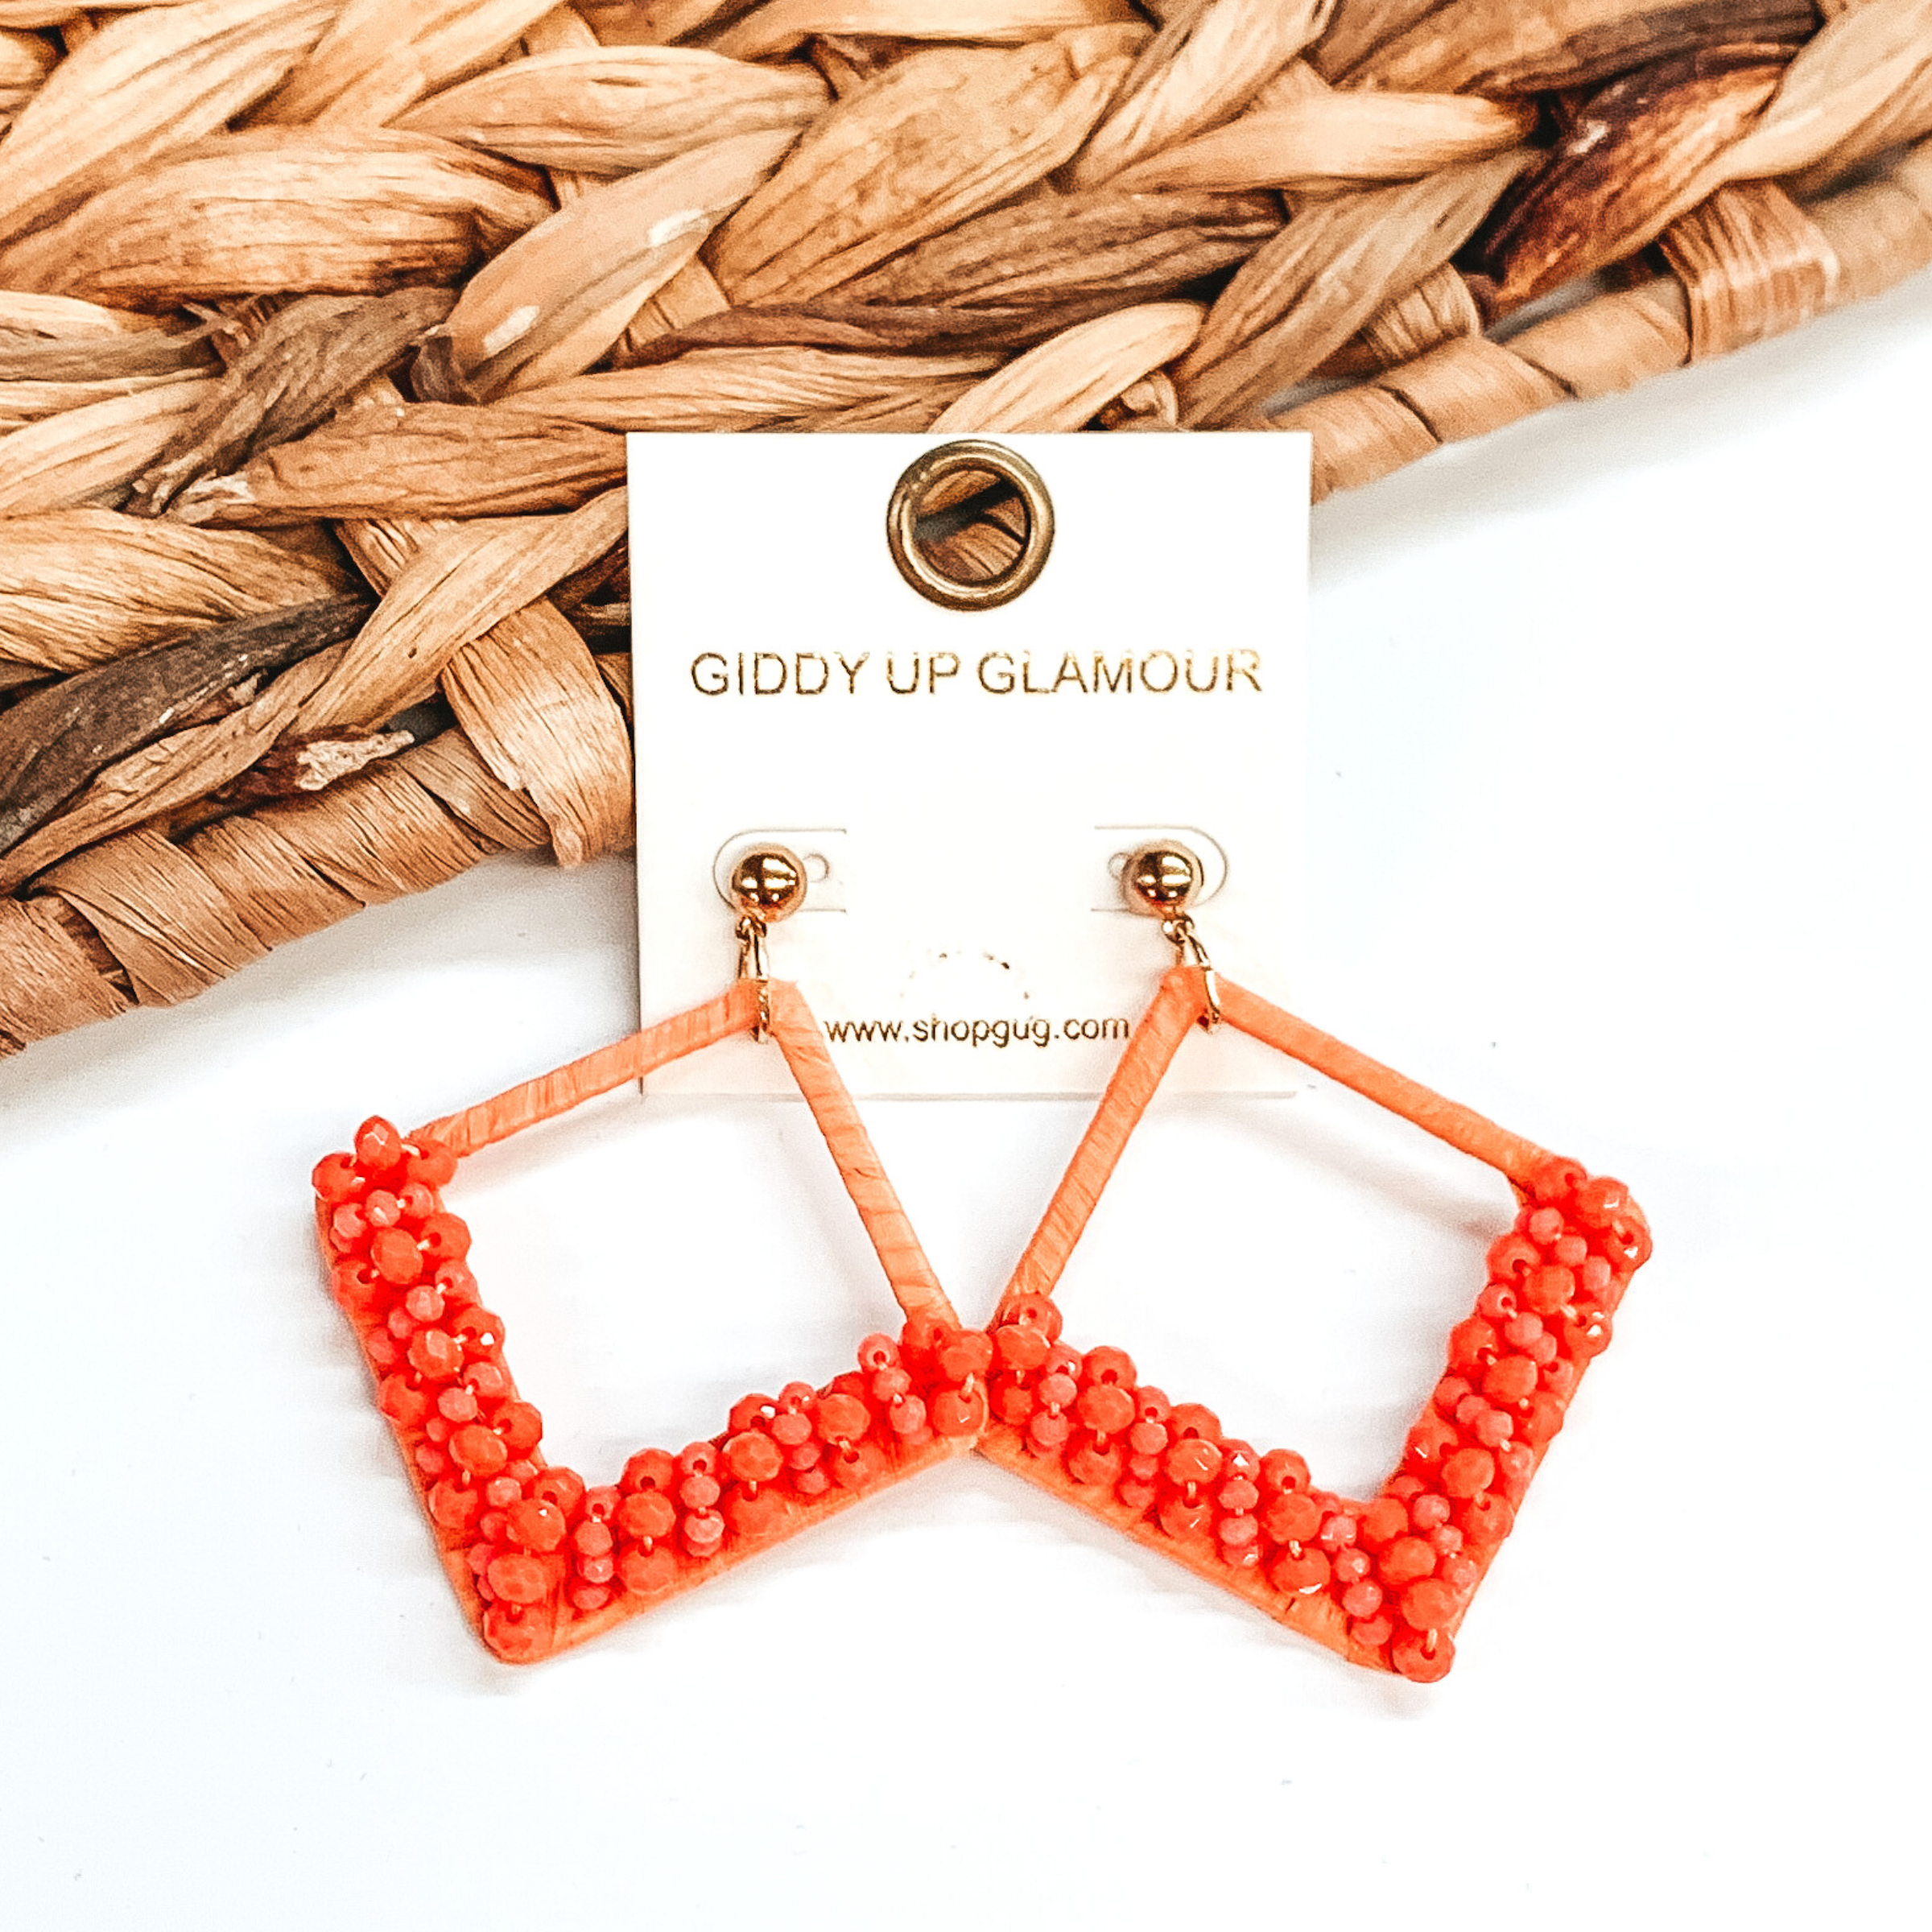 Open diamond shaped dangle earrings wrapped in raffia that includes a layer of beads on the bottom half of the earrings. These earrings are orange in color. These earrings are pictured on on a white background with basket weave decor.